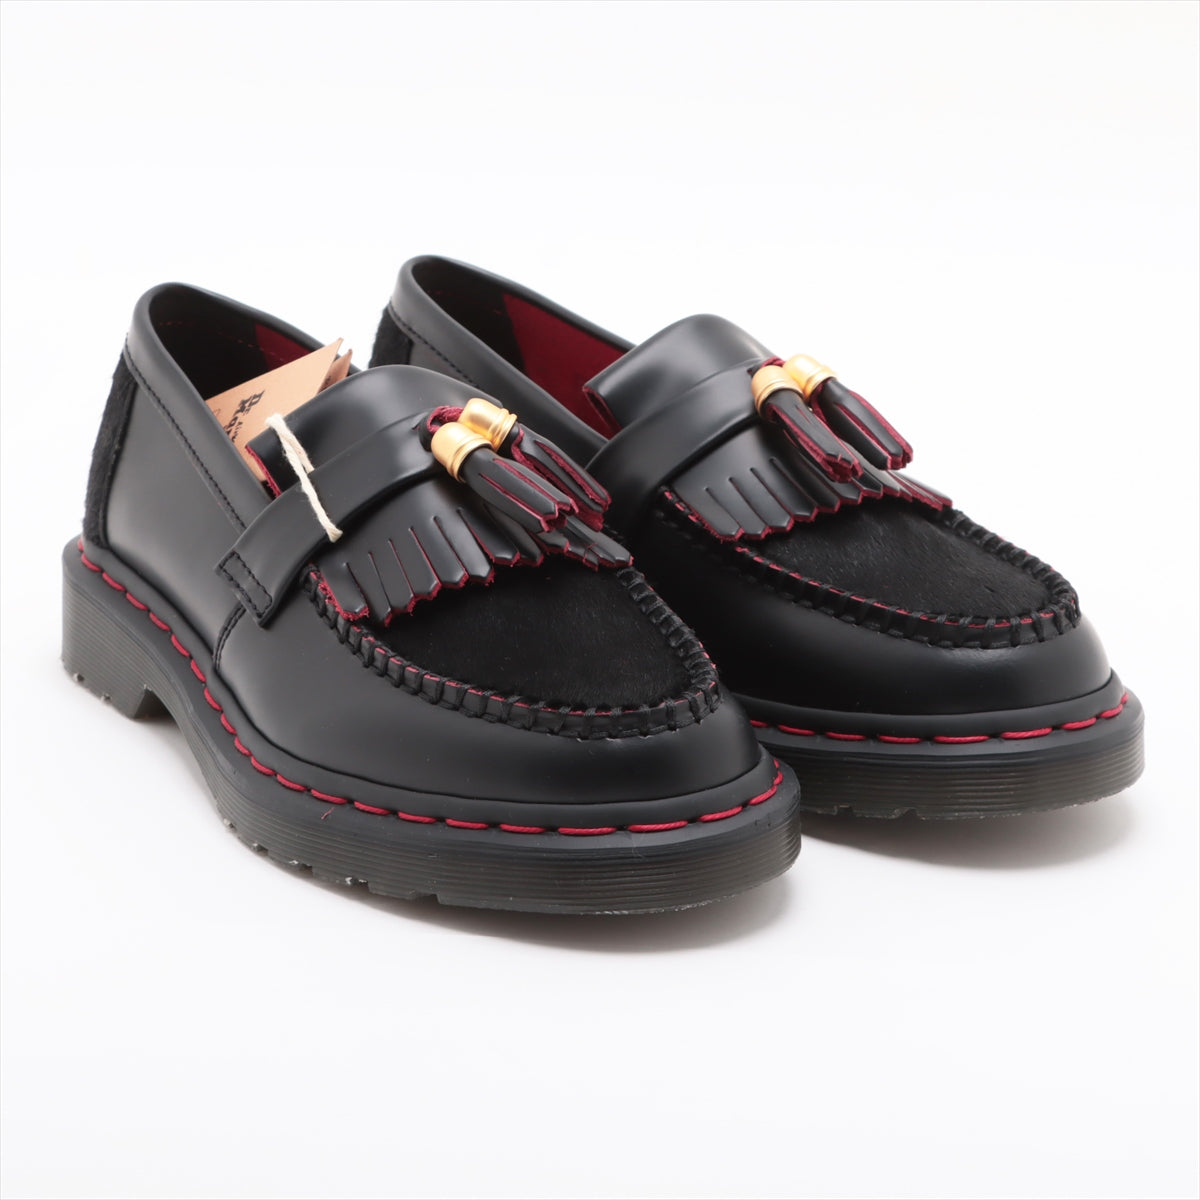 Dr. Martens 24SS Leather & unborn calf Loafer UK5 Ladies' Black x red Adrian tassels YEAR OF THE DRAGON